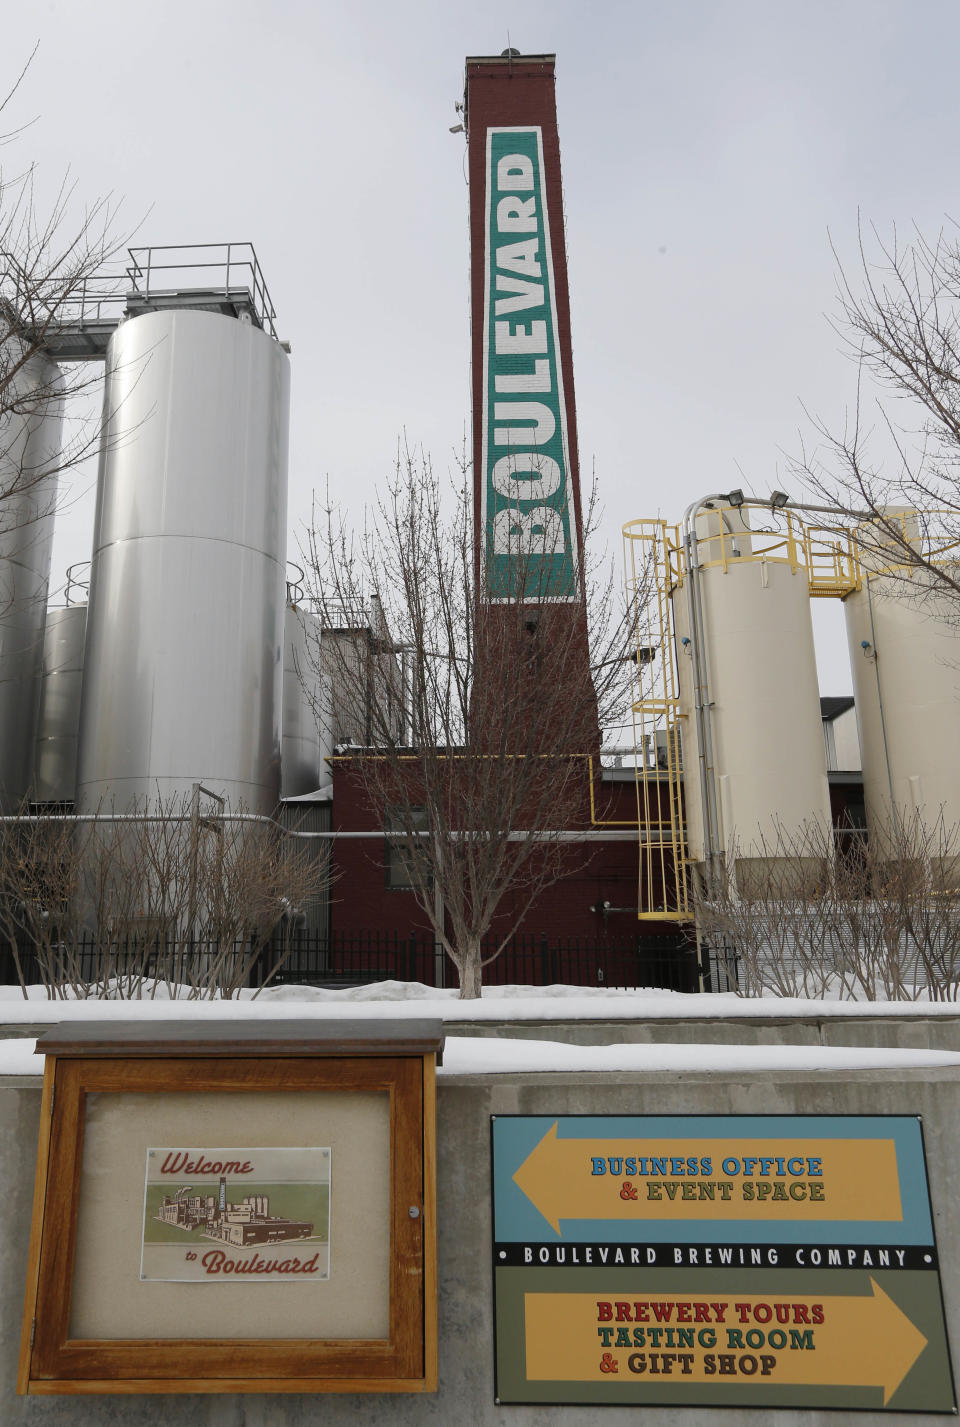 Signs direct visitors outside the entrance of Boulevard Brewing Company in Kansas City, Mo., Wednesday, Feb. 12, 2014. Boulevard Brewing Co., Kansas City’s biggest brewer and maker of the coveted Chocolate Ale and other beer, holds free 45-minute tours that showcase Boulevard’s history and brewing process and end at the tasting room. (AP Photo/Orlin Wagner)